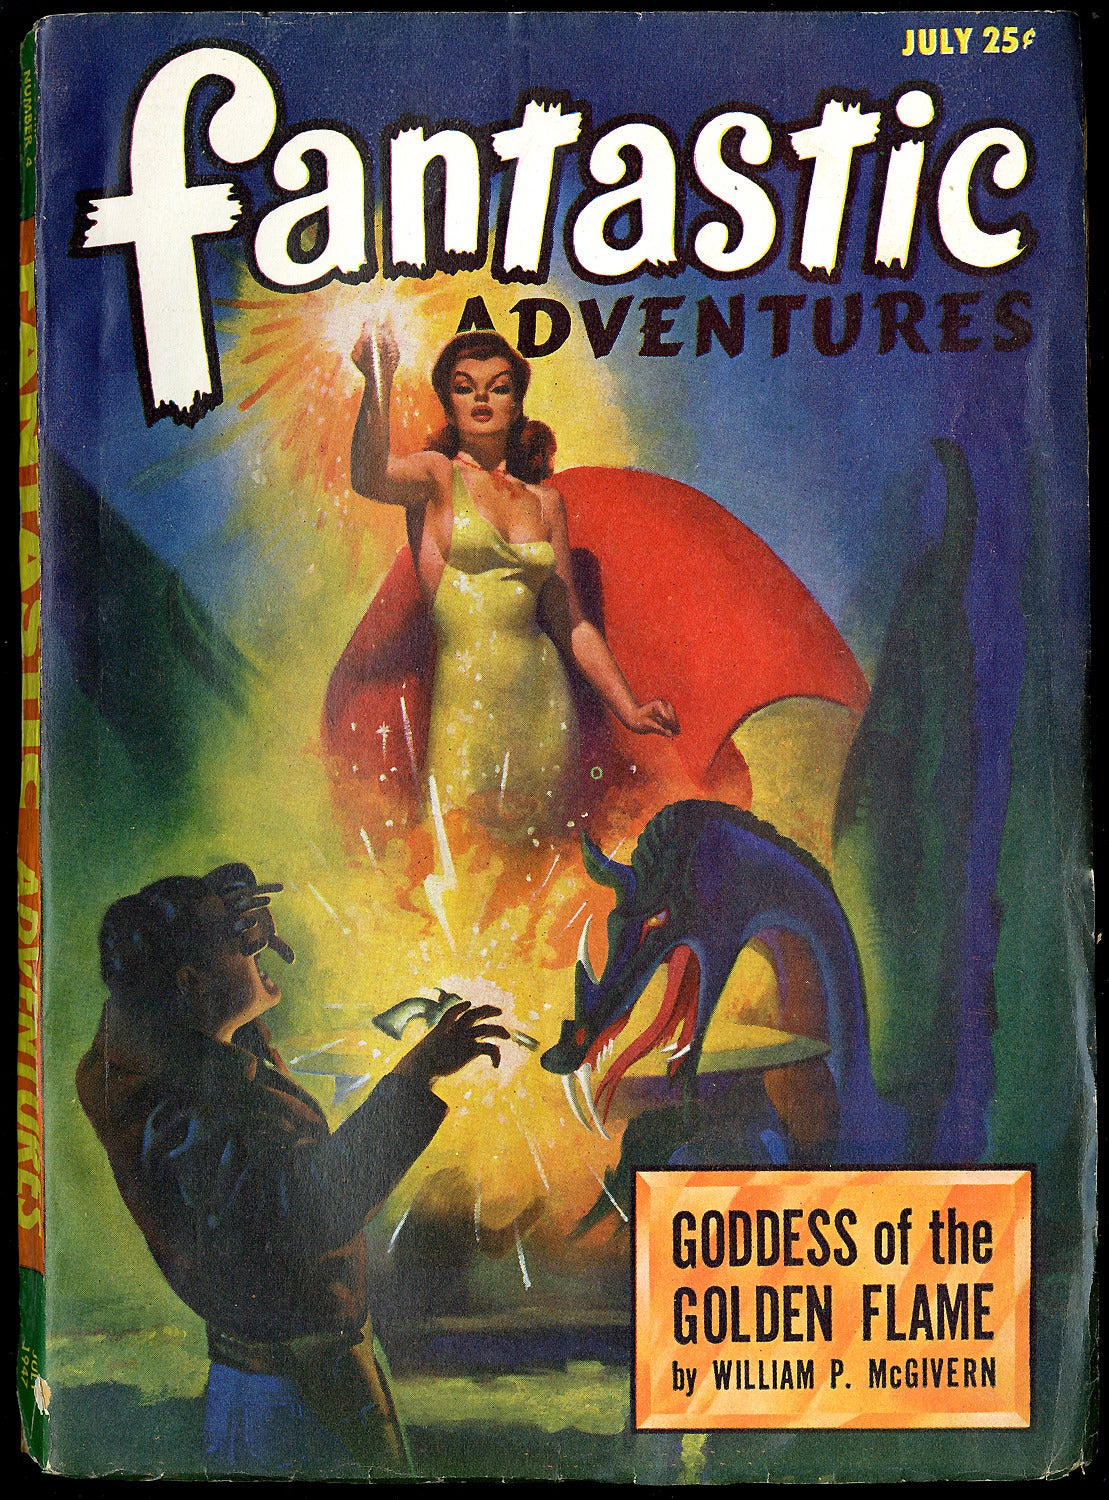 Fantastic Adventures Pulp Cover - Pop Art Painting by Harold McCauley